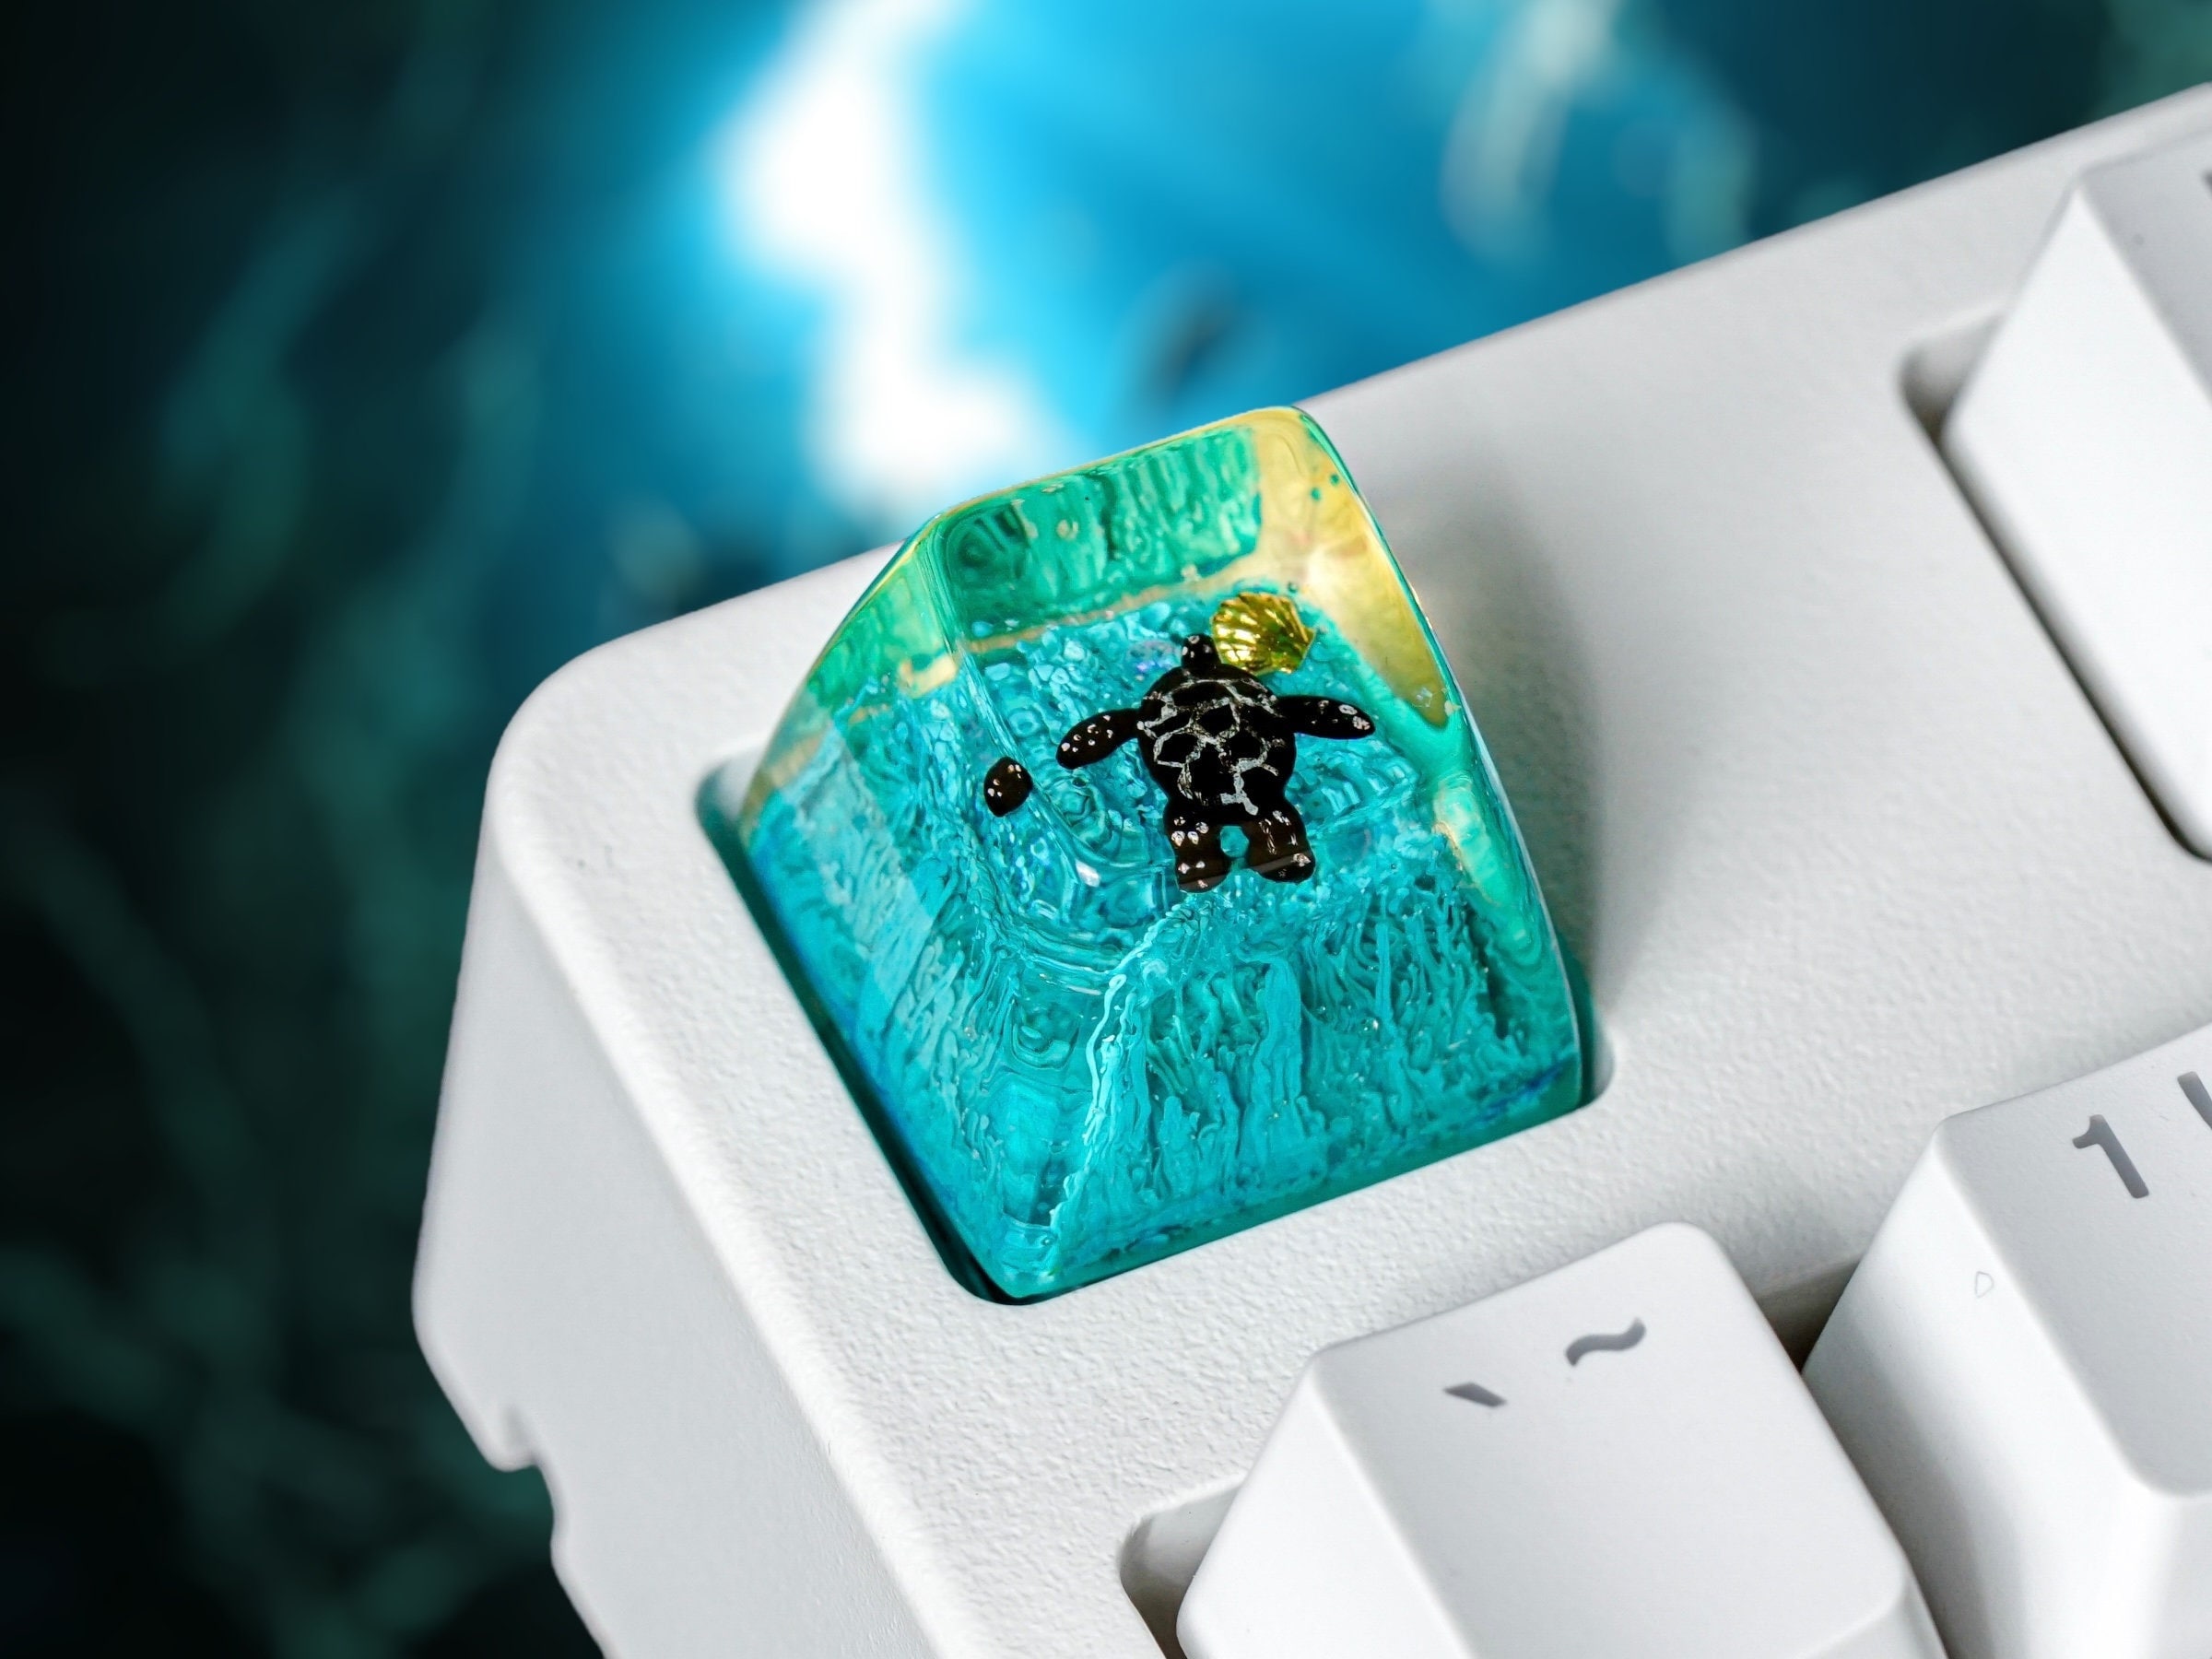 Black Turtle Keycap, Blue Coral, SA Profile Keycap, Keycap for MX Cherry Switches Mechanical Keyboard, Handmade Gift